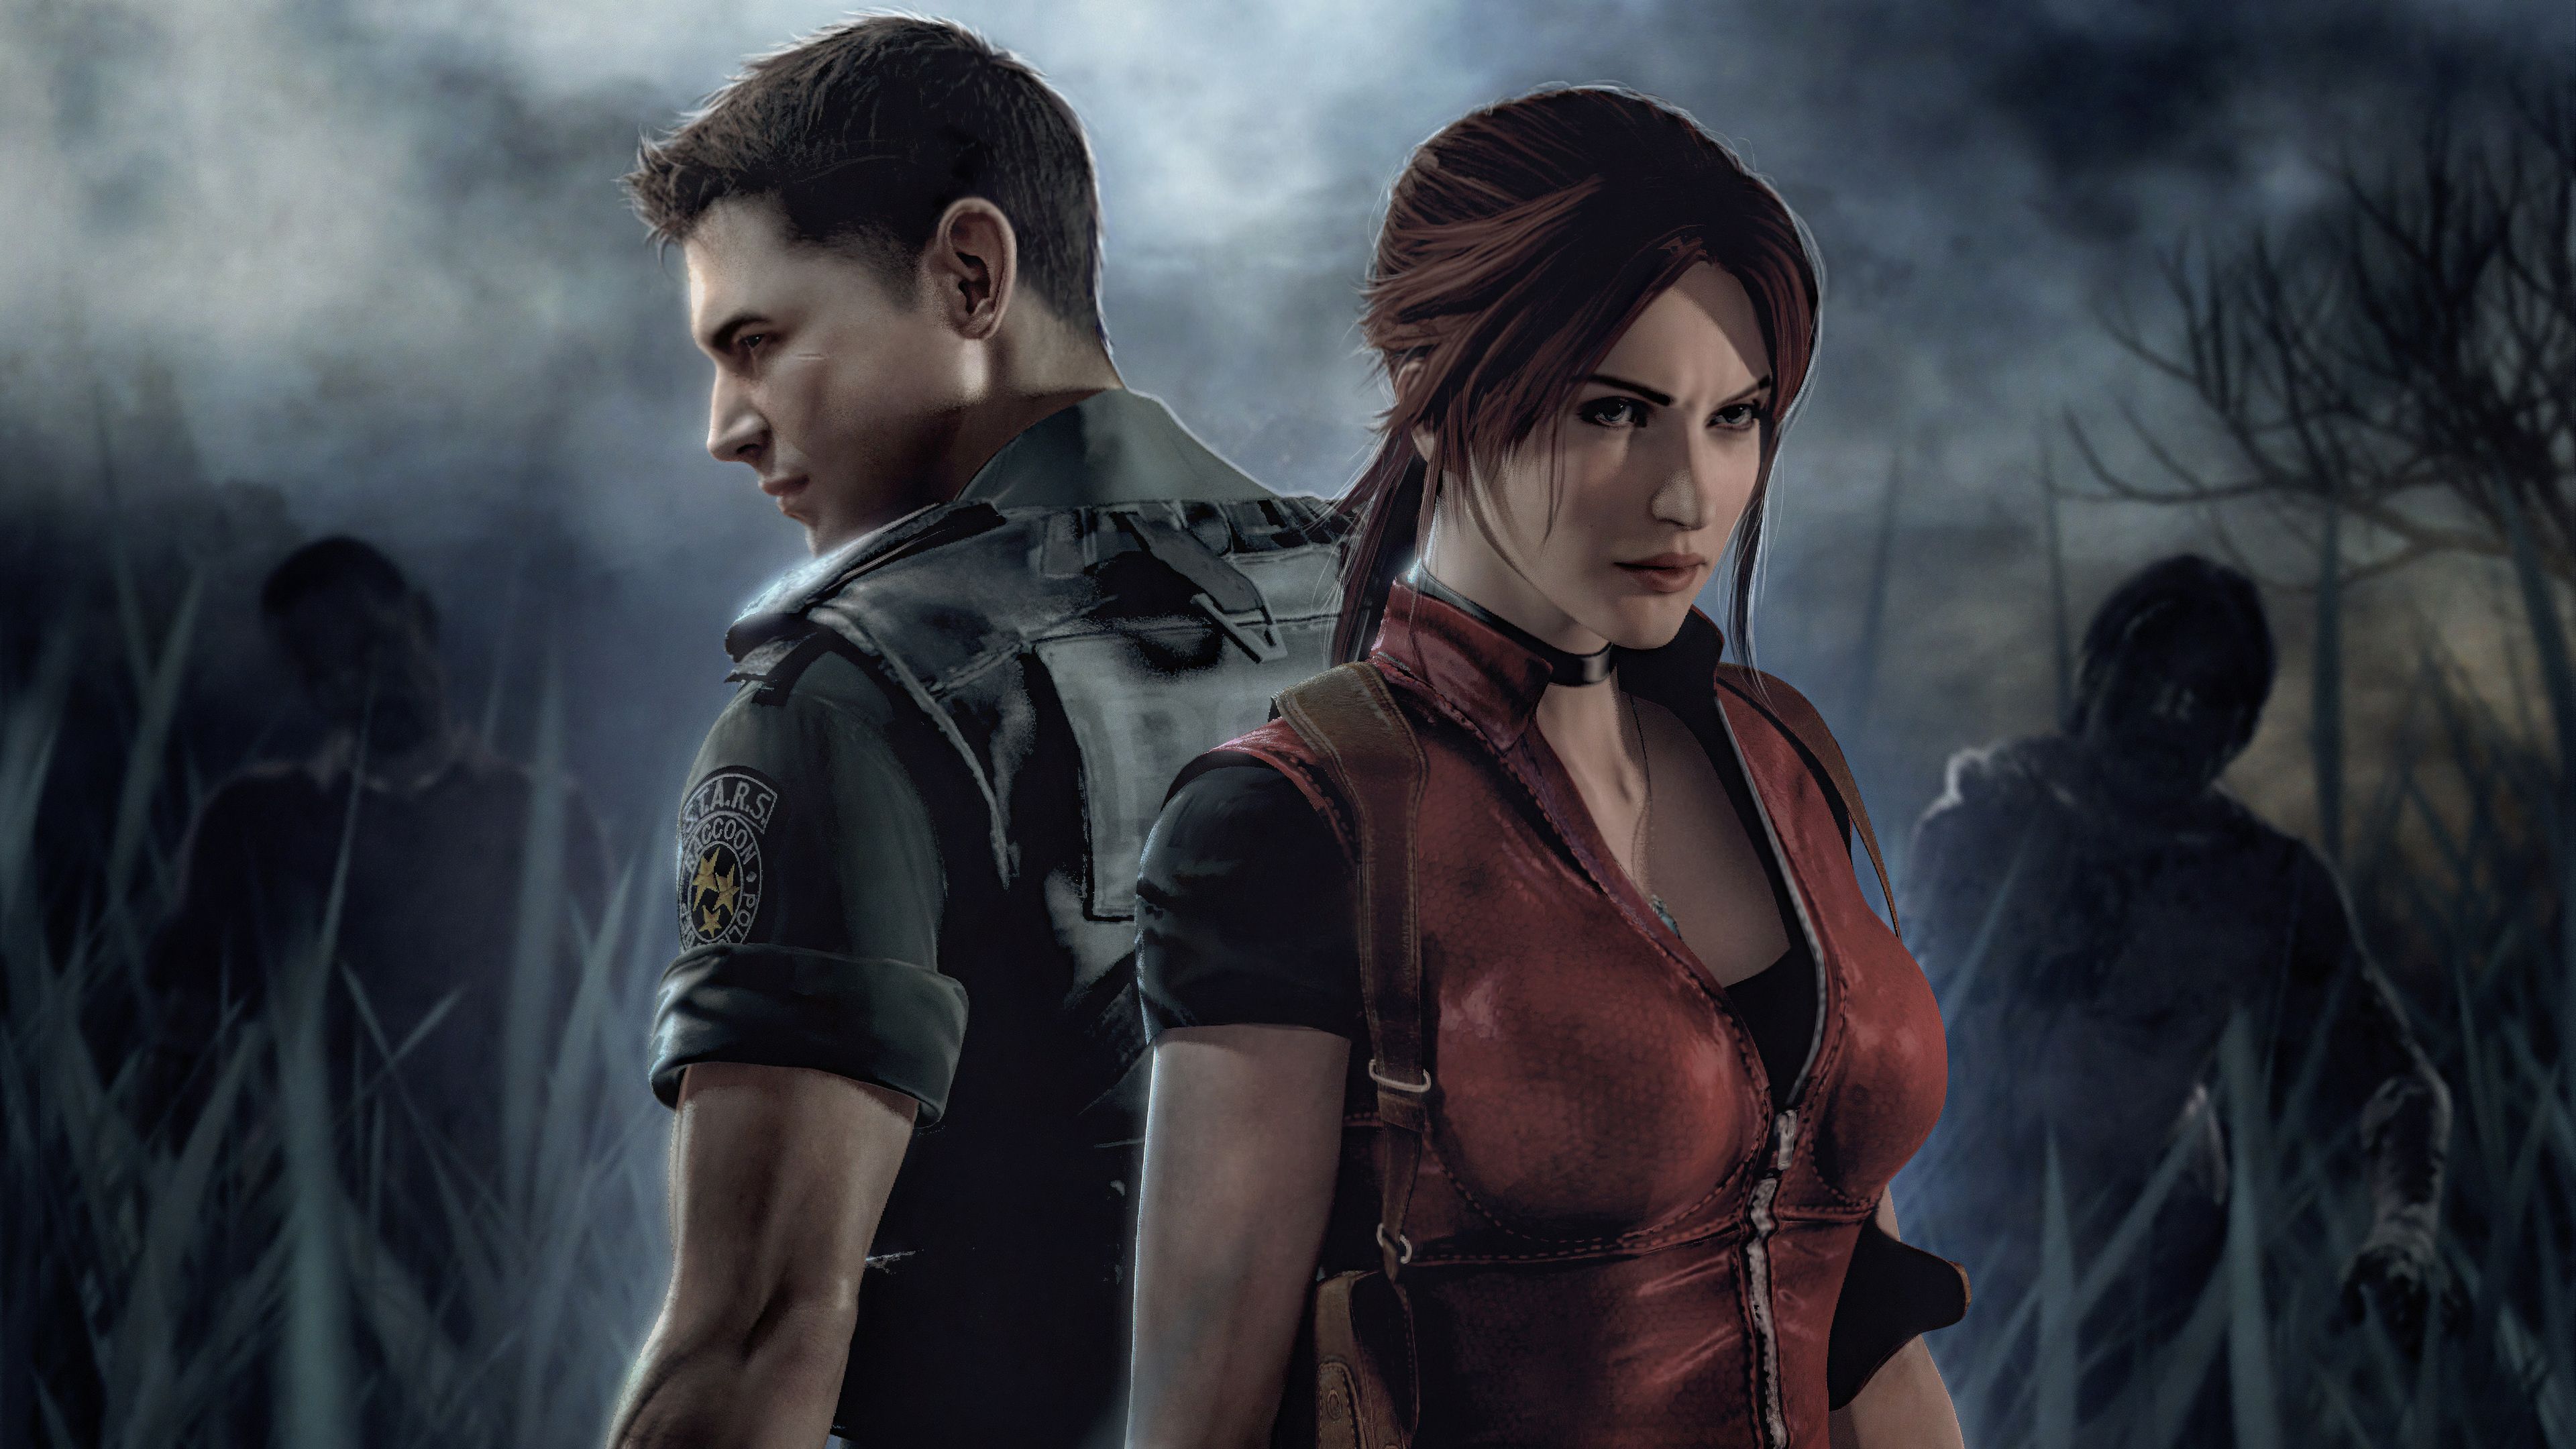 Wallpaper 4k Claire Redfield And Leon Resident Evil 2019 Games Wallpaper, 4k Wallpaper, Claire Redfield Wallpaper, Games Wallpaper, Hd Wallpaper, Leon Kennedy Wallpaper, Resident Evil 2 Wallpaper